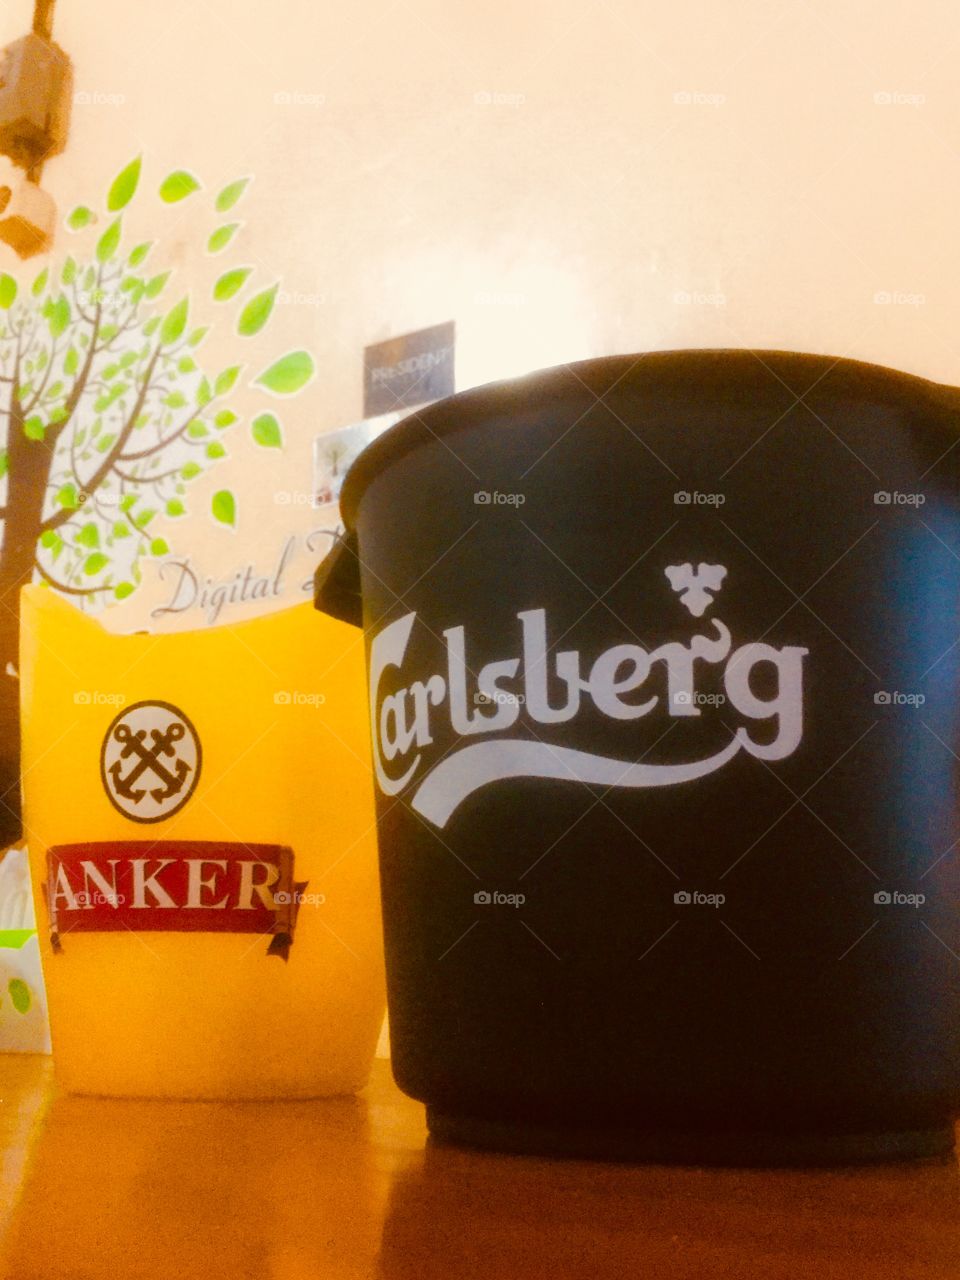 Carlsberg and anker cup